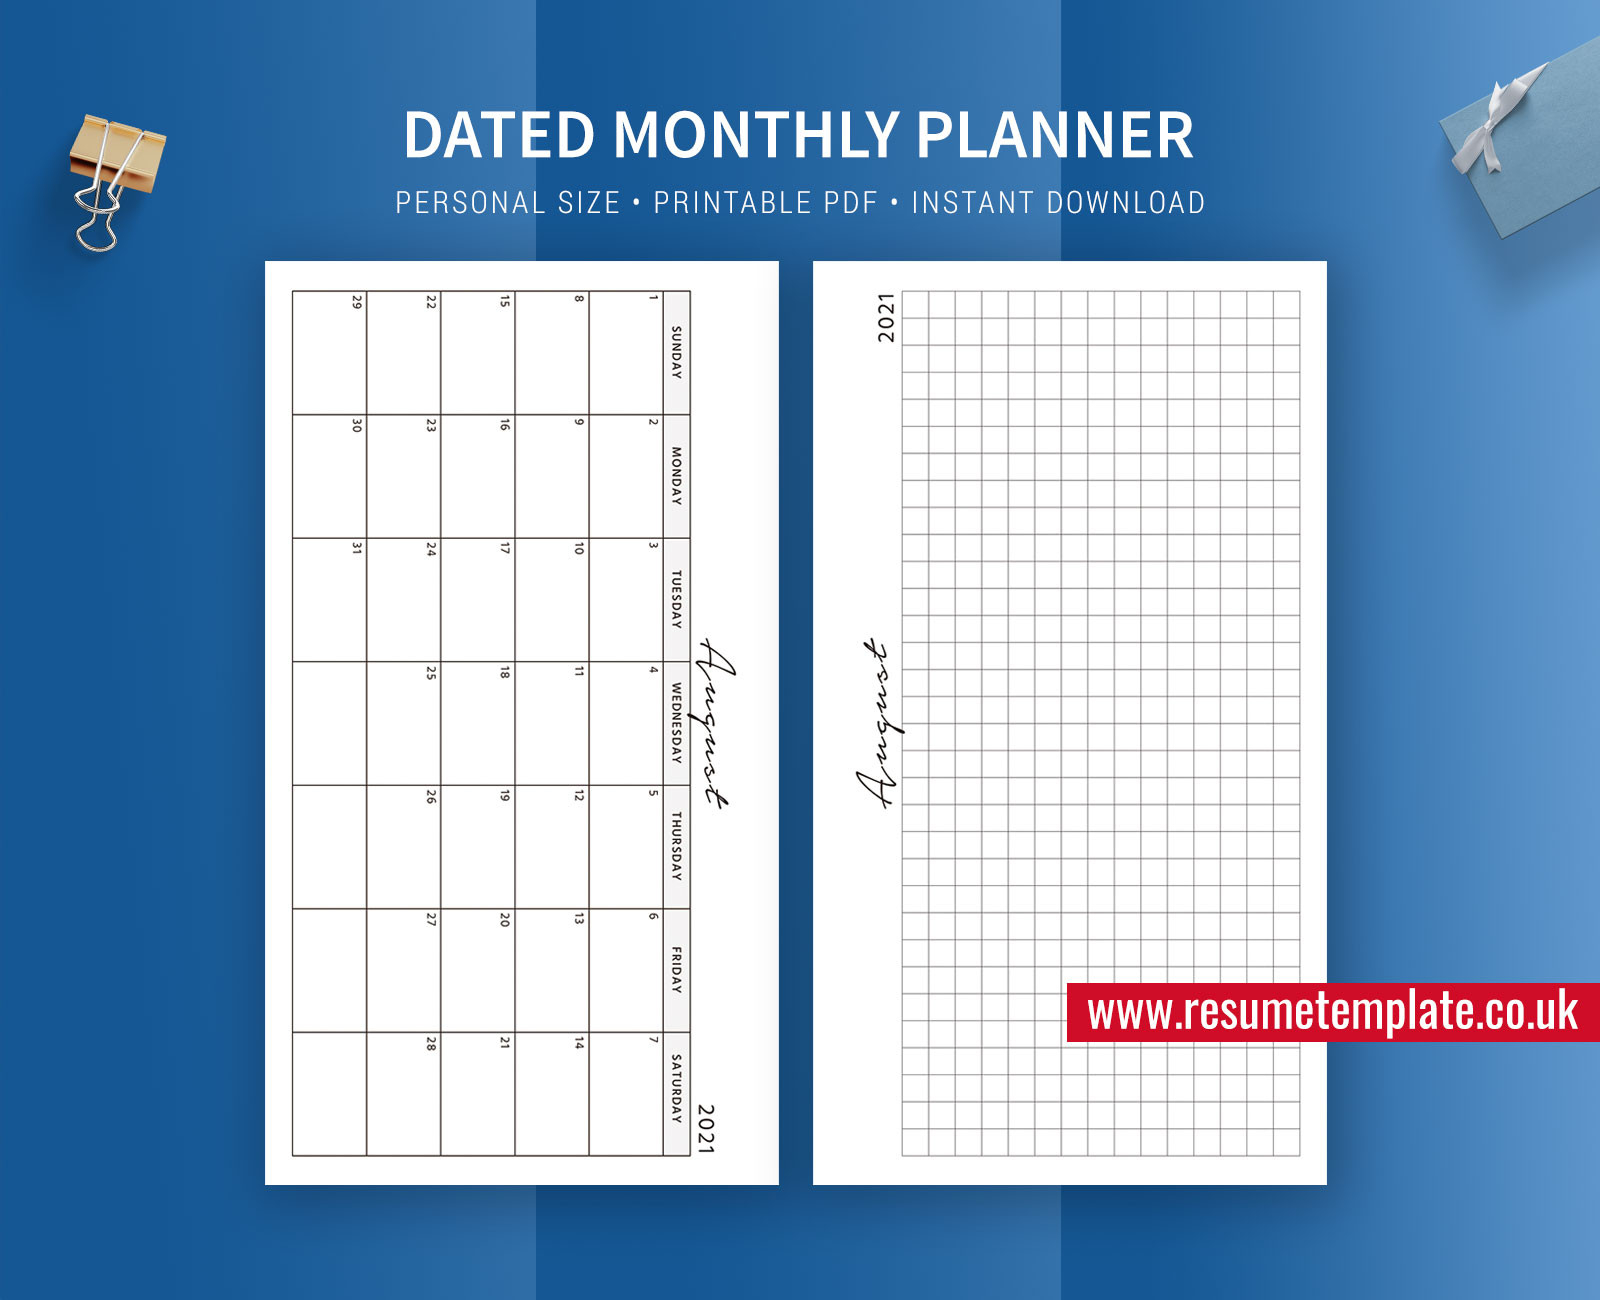 2021 Dated Daily Planner, Day Organizer, Personal Size-Printable 2 Page Monthly Planner 2021